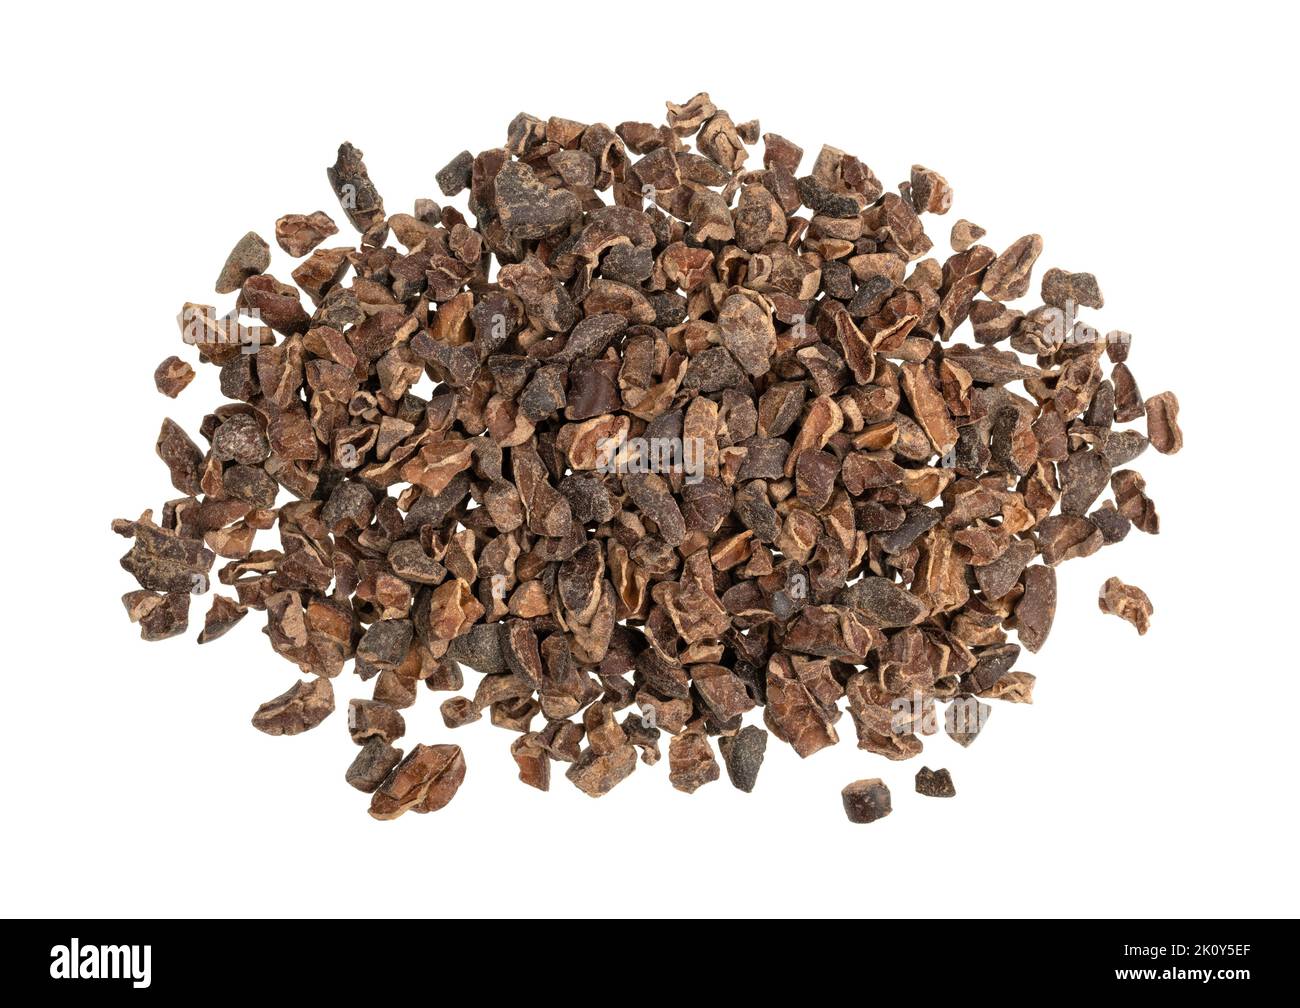 Top view of a small portion of cocoa nibs isolated on a white background. Stock Photo